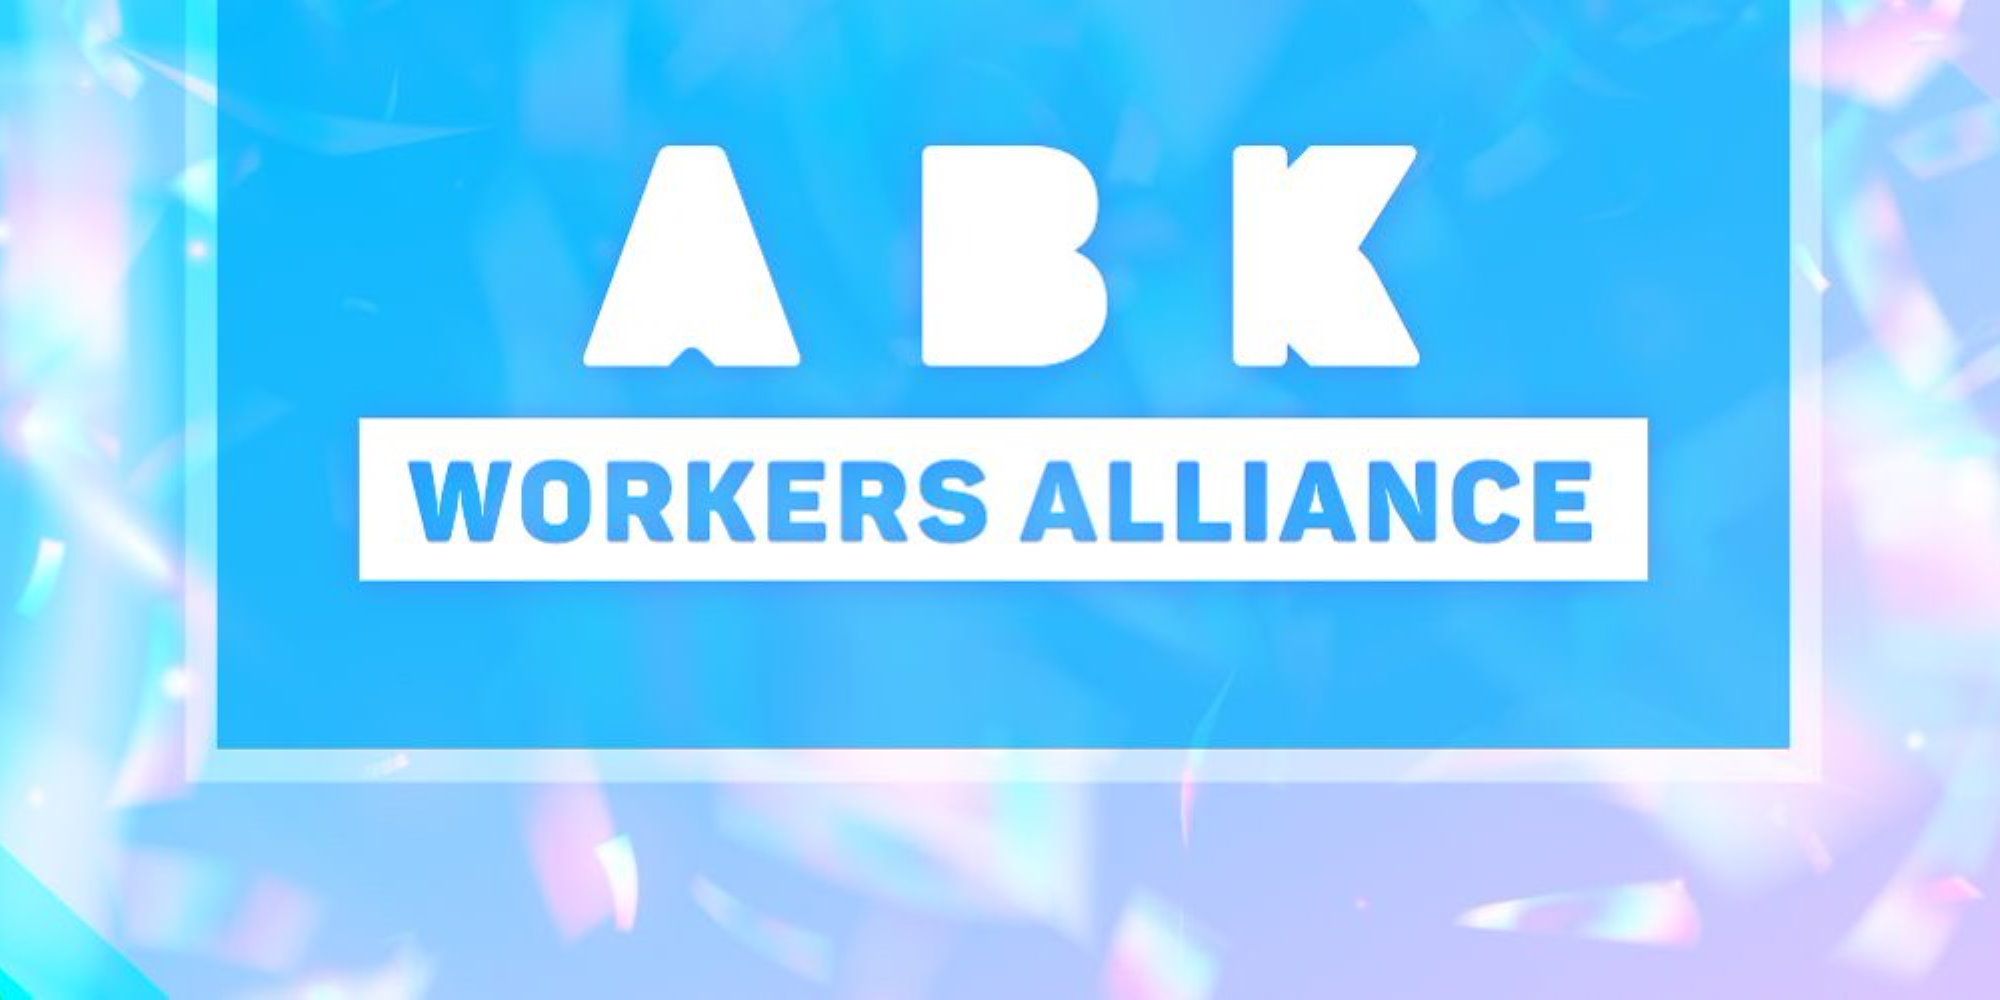 ABK Workers Alliance